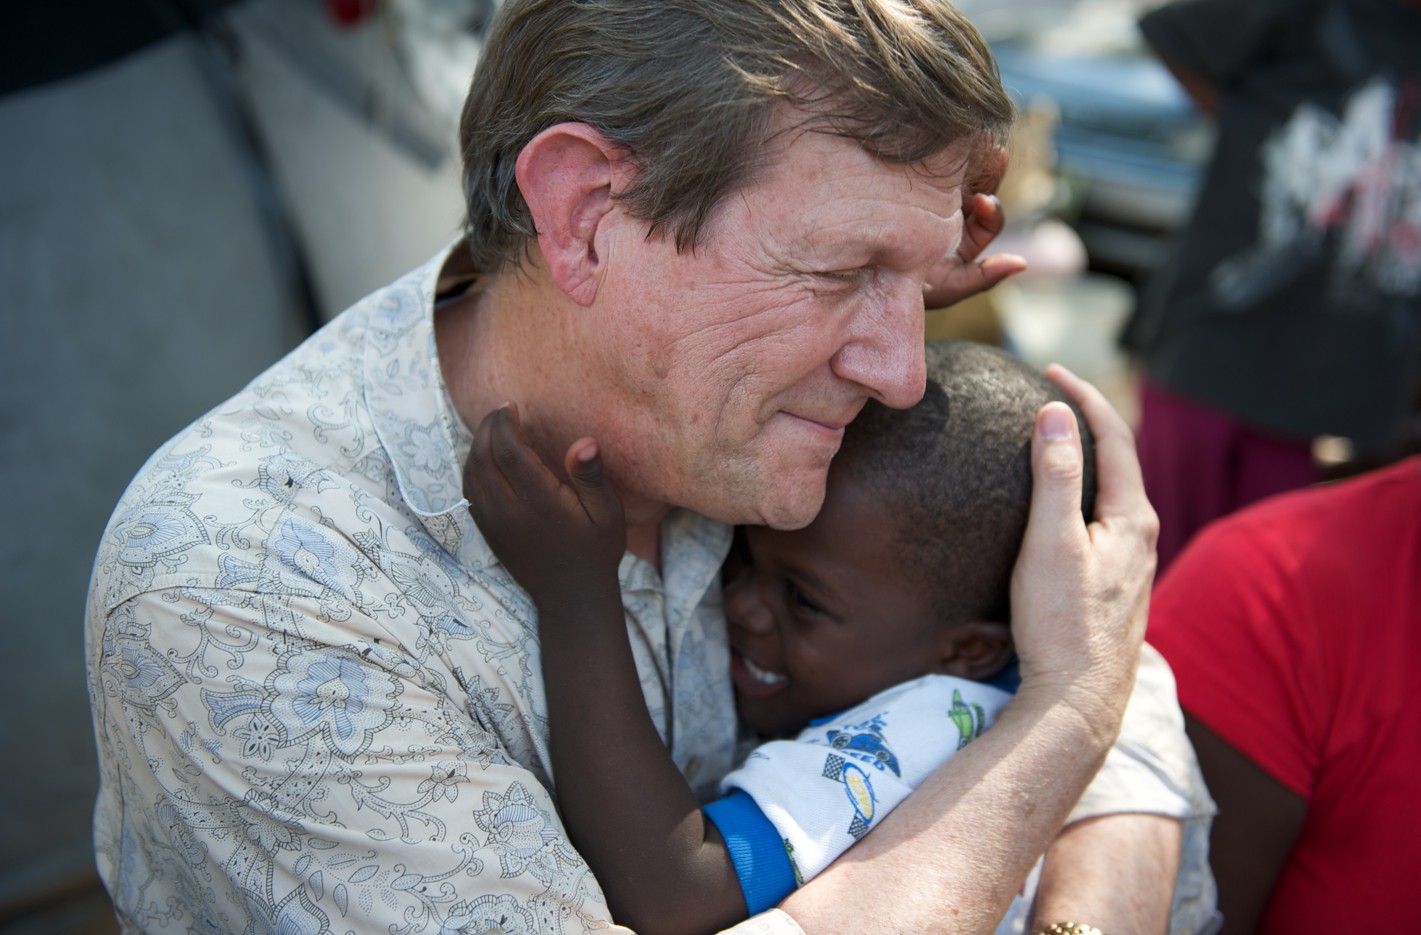 Wess Stafford embracing a child in his ministry work